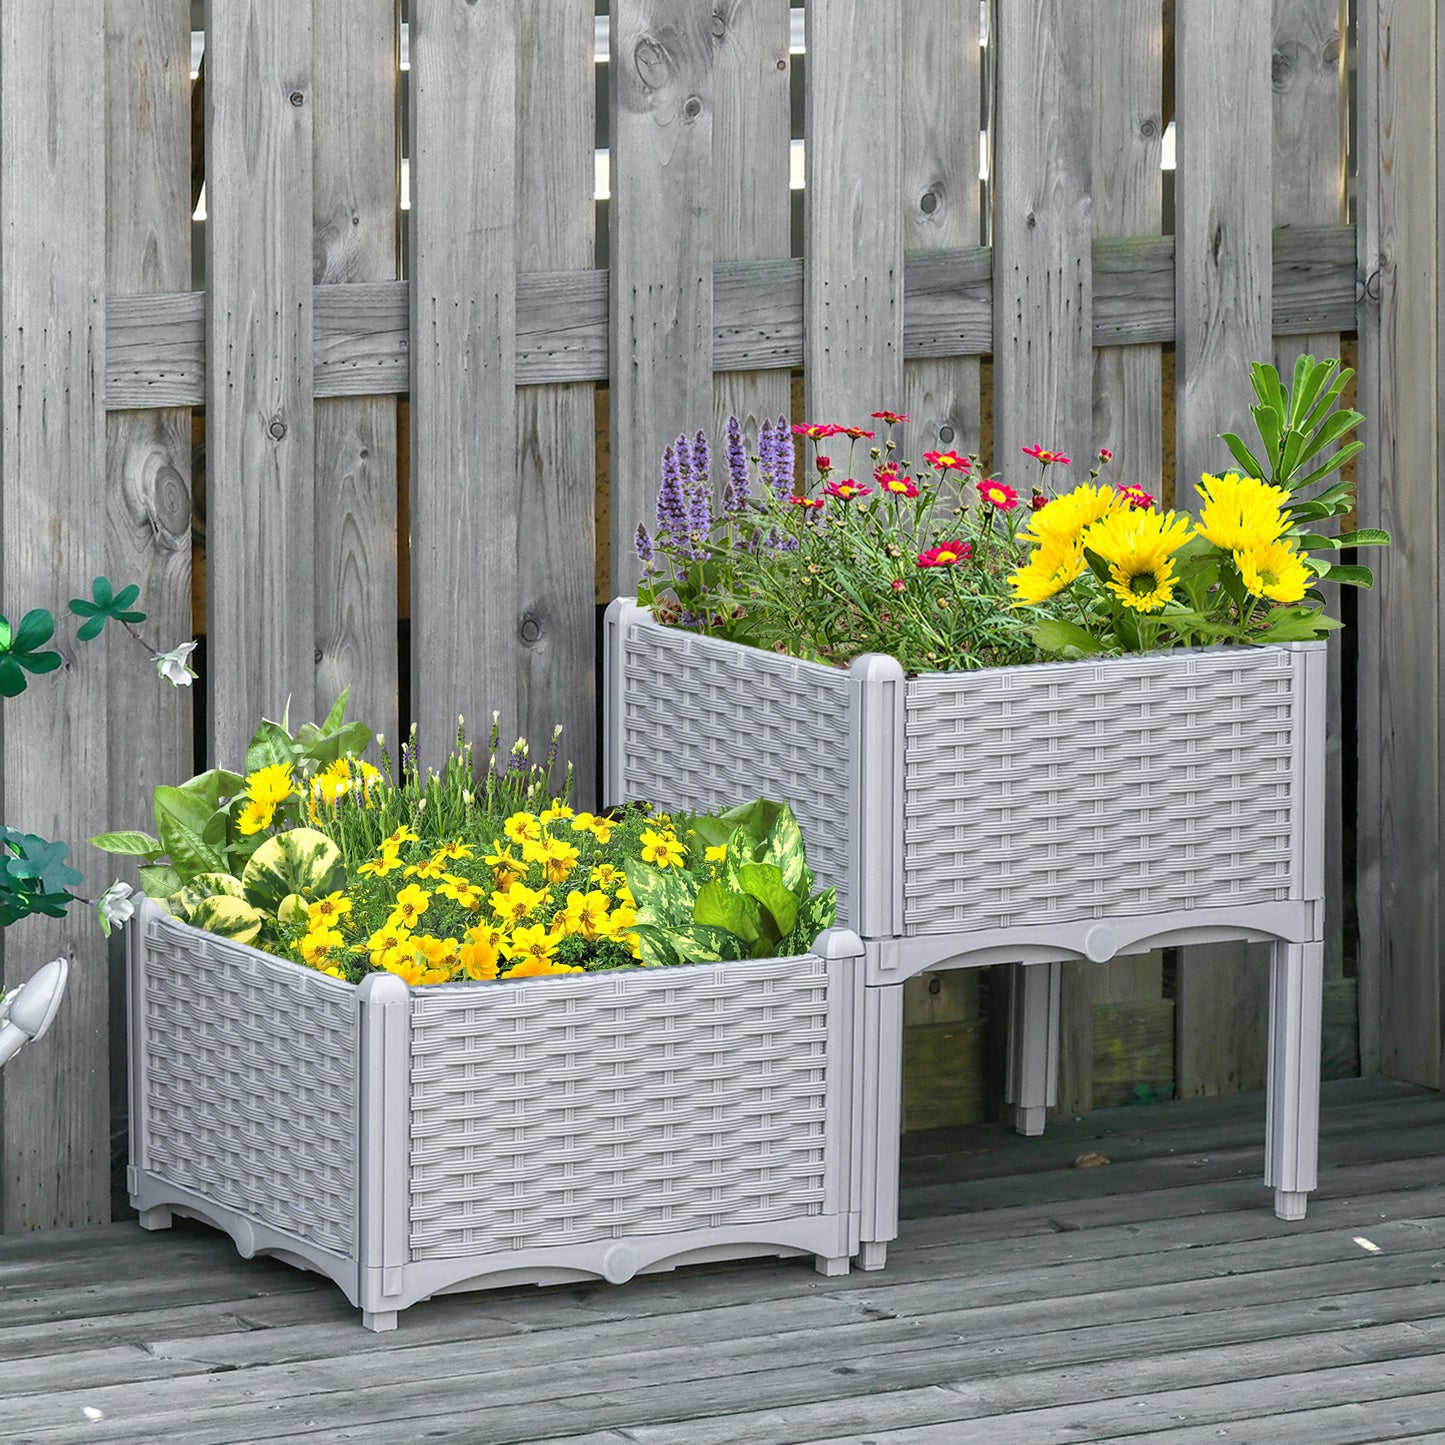 Outsunny 40cm x 40cm x 44cm Set of 2 Garden Raised Bed Elevated Patio Flower Plant Planter Box PP Vegetables Planting Container, Grey